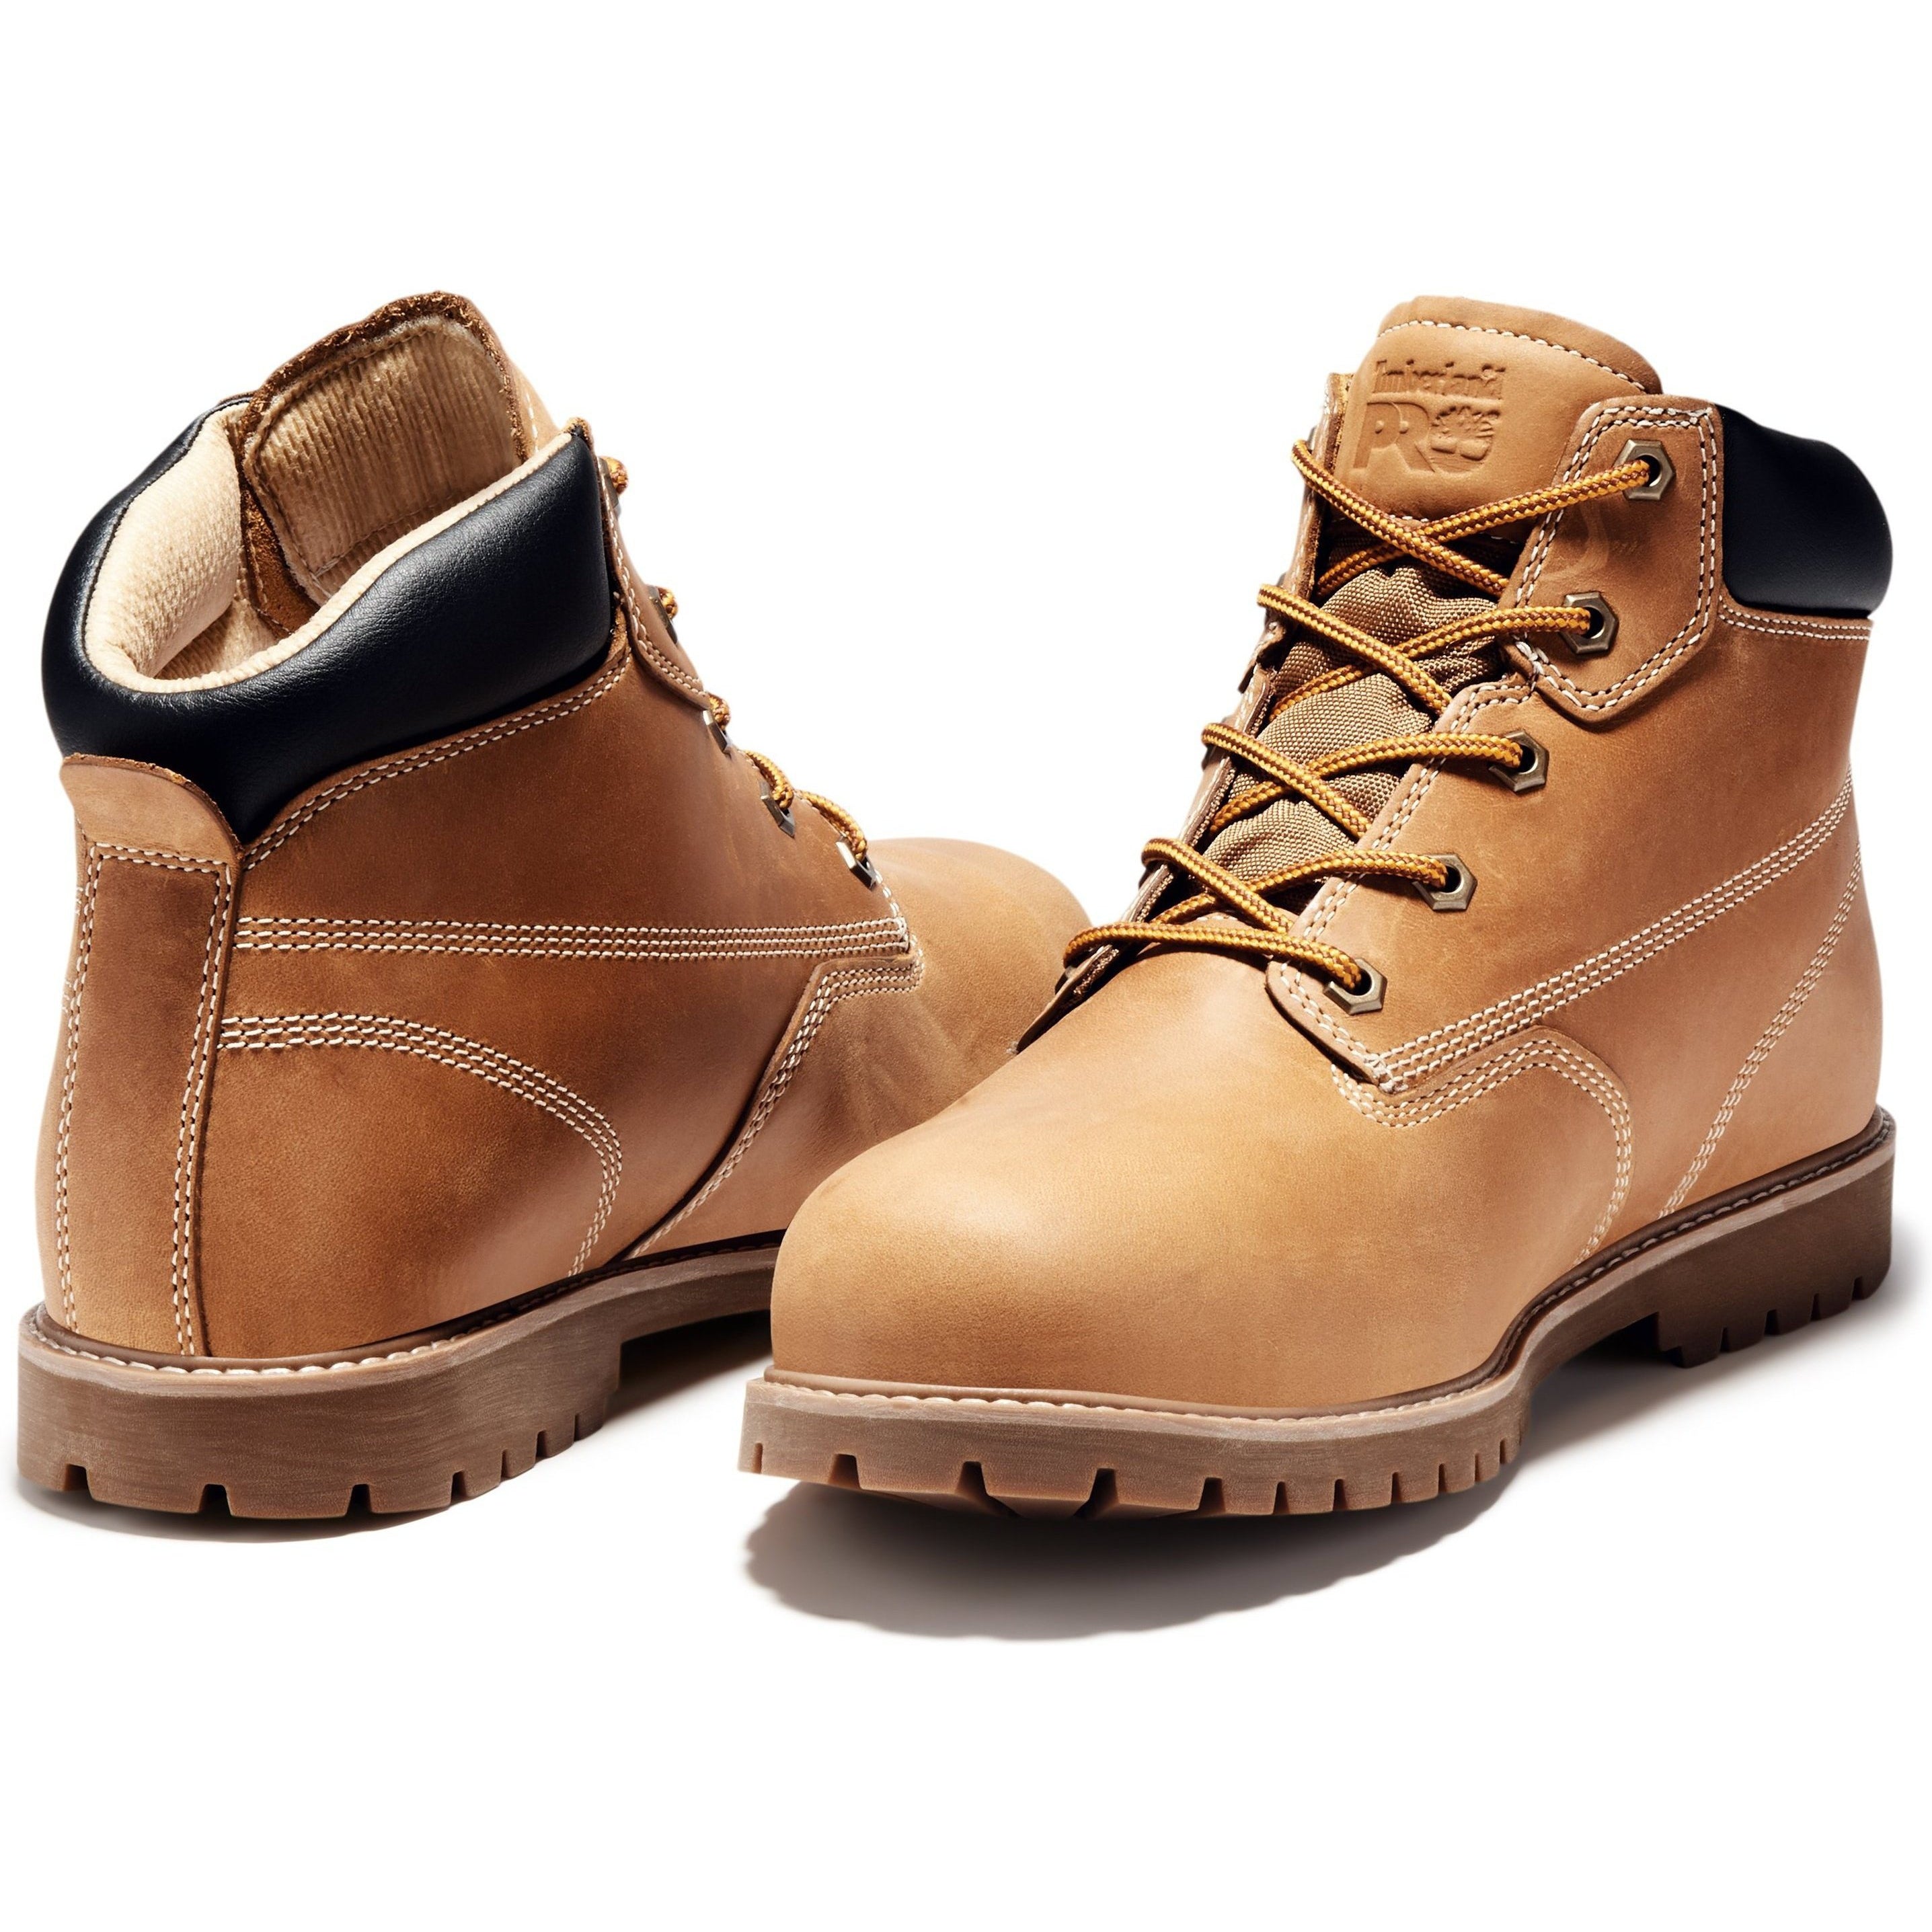 Timberland PRO Men's Gritstone 6" Steel Toe Work Boot - TB0A1Q8K231  - Overlook Boots